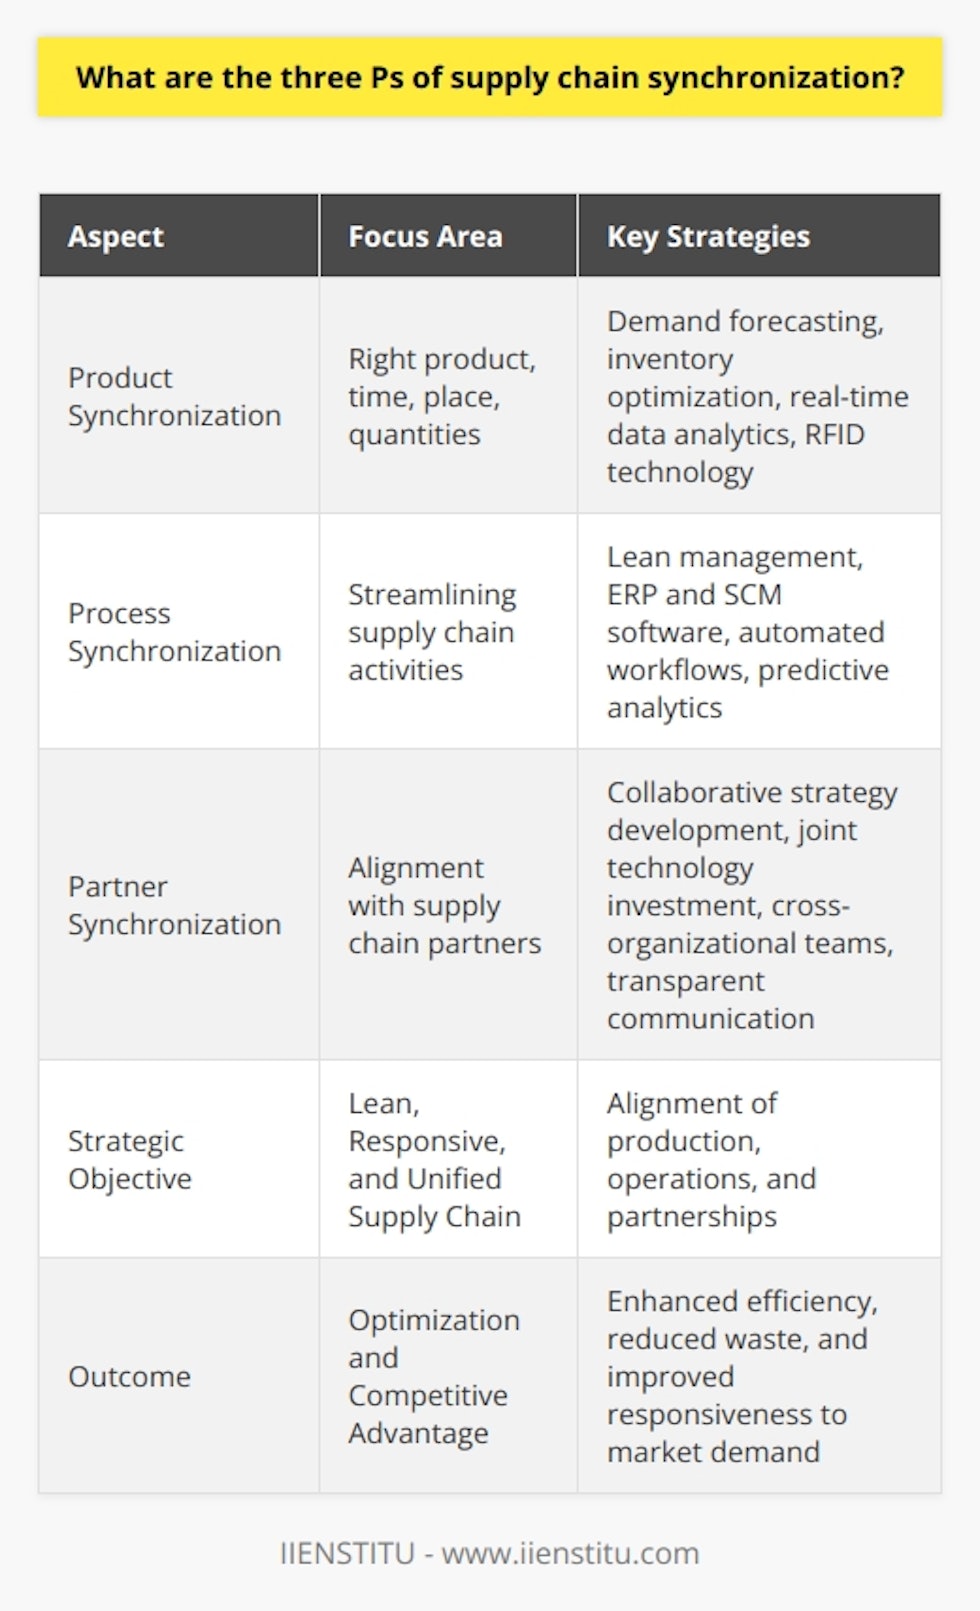 Supply Chain Synchronization OverviewSupply chain synchronization is a strategic approach that coordinates all aspects of the supply chain to operate in unison, ensuring a smooth flow of materials, information, and financial resources. This approach helps in meeting consumer demands more effectively and can provide a competitive advantage in today's fast-paced market. Let's delve into the three Ps—product, process, and partner—that are fundamental to achieving a synchronized supply chain.**Product Synchronization**In the context of supply chain management, product synchronization is about having the right products at the right time and place, and in the right quantities. This is a delicate balancing act that requires precision in aligning production with demand. Companies must have sophisticated demand forecasting methods that are sensitive to market trends and customer behavior. With product synchronization, the goal is to minimize the lag between when a product is ready and when it is needed. Inventory optimization models are vital here, as they help manage safety stock levels while avoiding costly overstocks or missed sales due to stockouts. Successful product synchronization often involves leveraging real-time data analytics and RFID technology for instant visibility of product movement through the supply chain.**Process Synchronization**Process synchronization is about streamlining and aligning all supply chain activities to make them more efficient and responsive. From sourcing raw materials to delivering the final product to the consumer, each step must be aligned with the others. A key strategy within process synchronization is the employment of lean management techniques, which aim to eliminate waste in all forms and enhance value-added activity. Furthermore, process synchronization often requires integrating advanced planning systems, such as Enterprise Resource Planning (ERP) and Supply Chain Management (SCM) software, which help in coordinating various activities and support decision-making with predictive analytics. Automated workflows and synchronization of production schedules with suppliers and logistics providers are also essential to ensure timely operations and minimizing bottlenecks.**Partner Synchronization**The third P, partner synchronization, is about aligning objectives and activities with those of supply chain partners, which includes suppliers, distributors, third-party logistics providers (3PLs), and even customers. The essence of partner synchronization is in fostering a climate of collaboration and trust, where information is shared openly and strategies are co-developed to achieve mutually beneficial outcomes. This can involve joint investment in technology platforms for better data sharing, cross-organizational teams working on process improvement, and even shared incentives for meeting collective goals. Transparent communication is the bedrock of partner synchronization. Creating alignment on performance metrics, lead times, and quality requirements ensures all parties are working towards a common vision of supply chain excellence.In summary, the three Ps of supply chain synchronization ensure that products are delivered efficiently and effectively, that processes are lean and integrated, and that partners are working in concert towards shared goals. While achieving supply chain synchronization can be complex, it's a powerful strategy for businesses looking to optimize their supply chain operations in a globally competitive market.